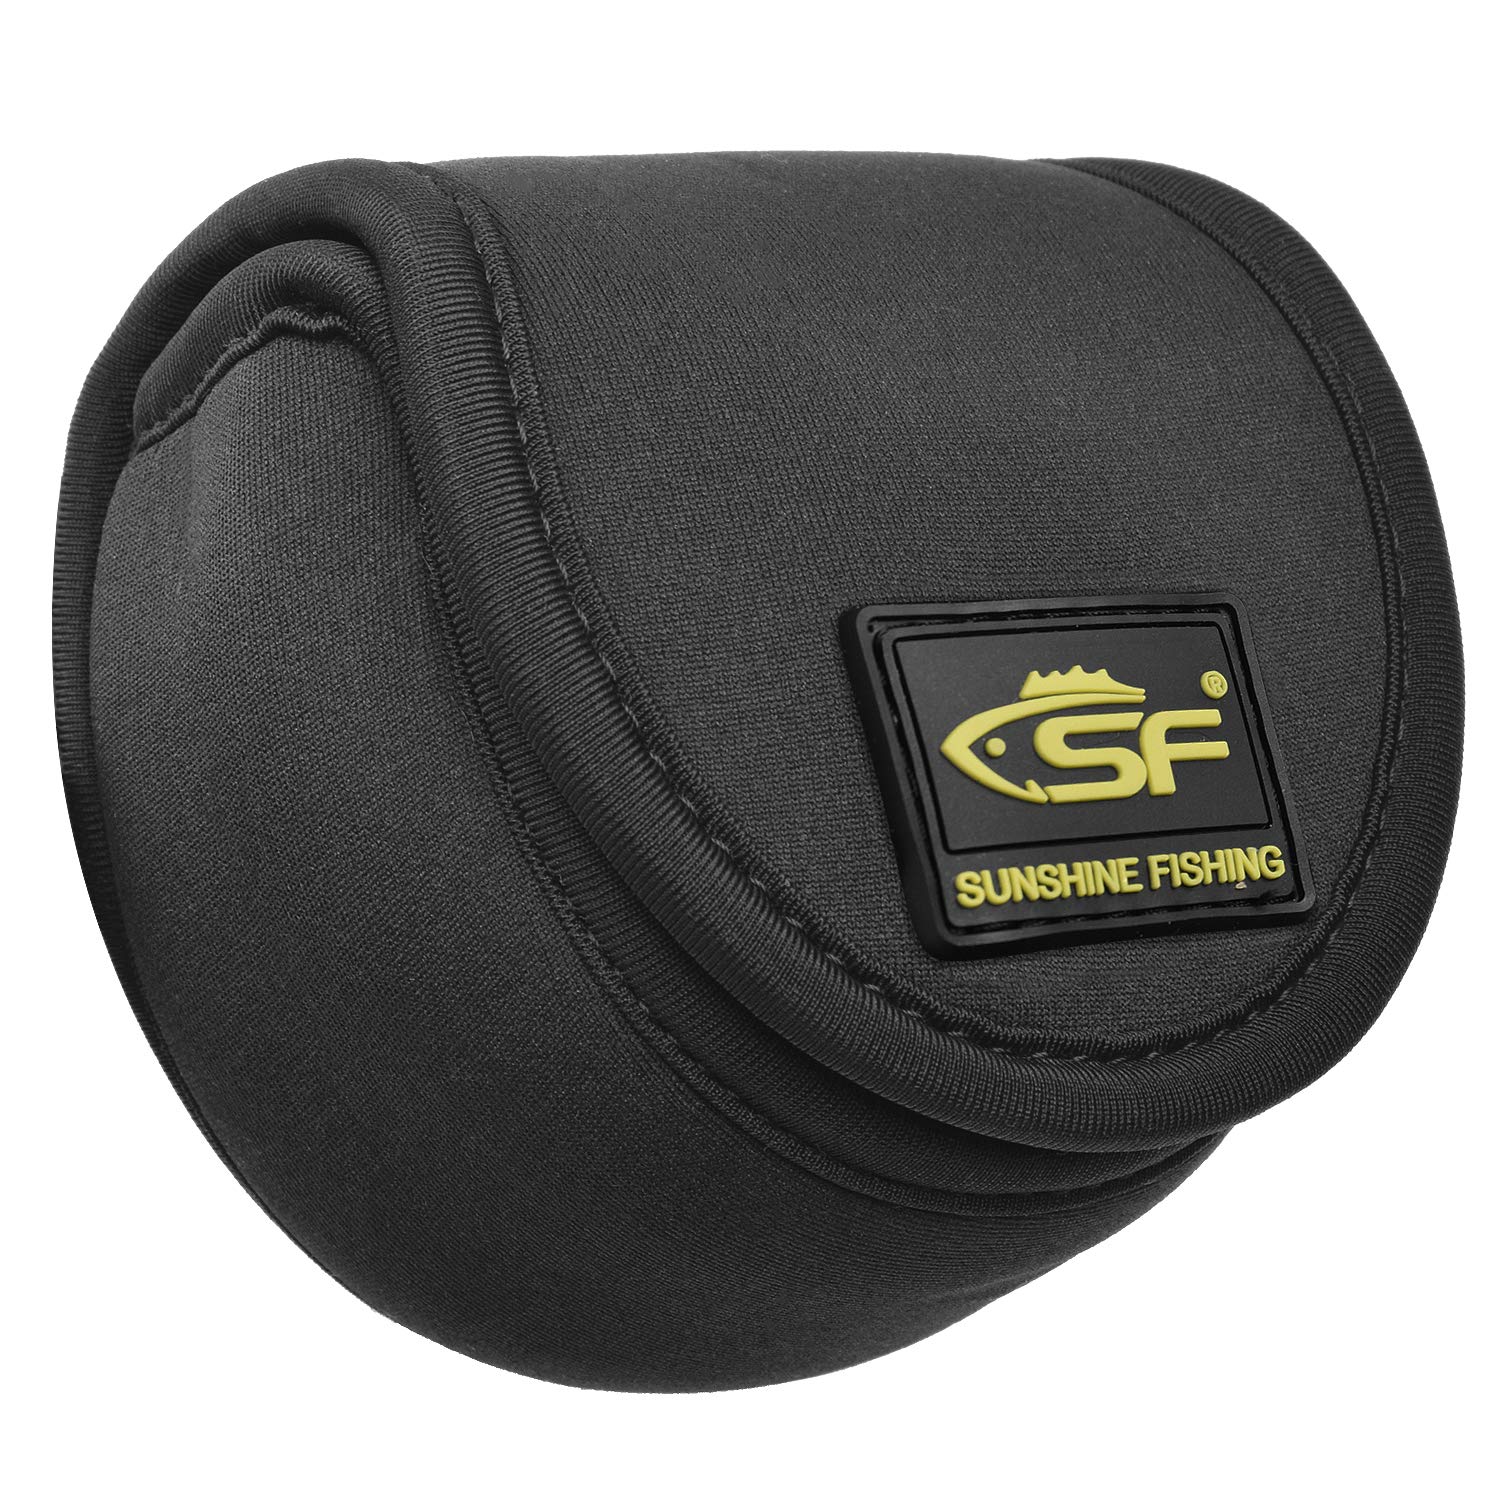 SF Fly Fishing Reel Case Pouch Cover Fit 3/4 5/6 7/8 wt Black